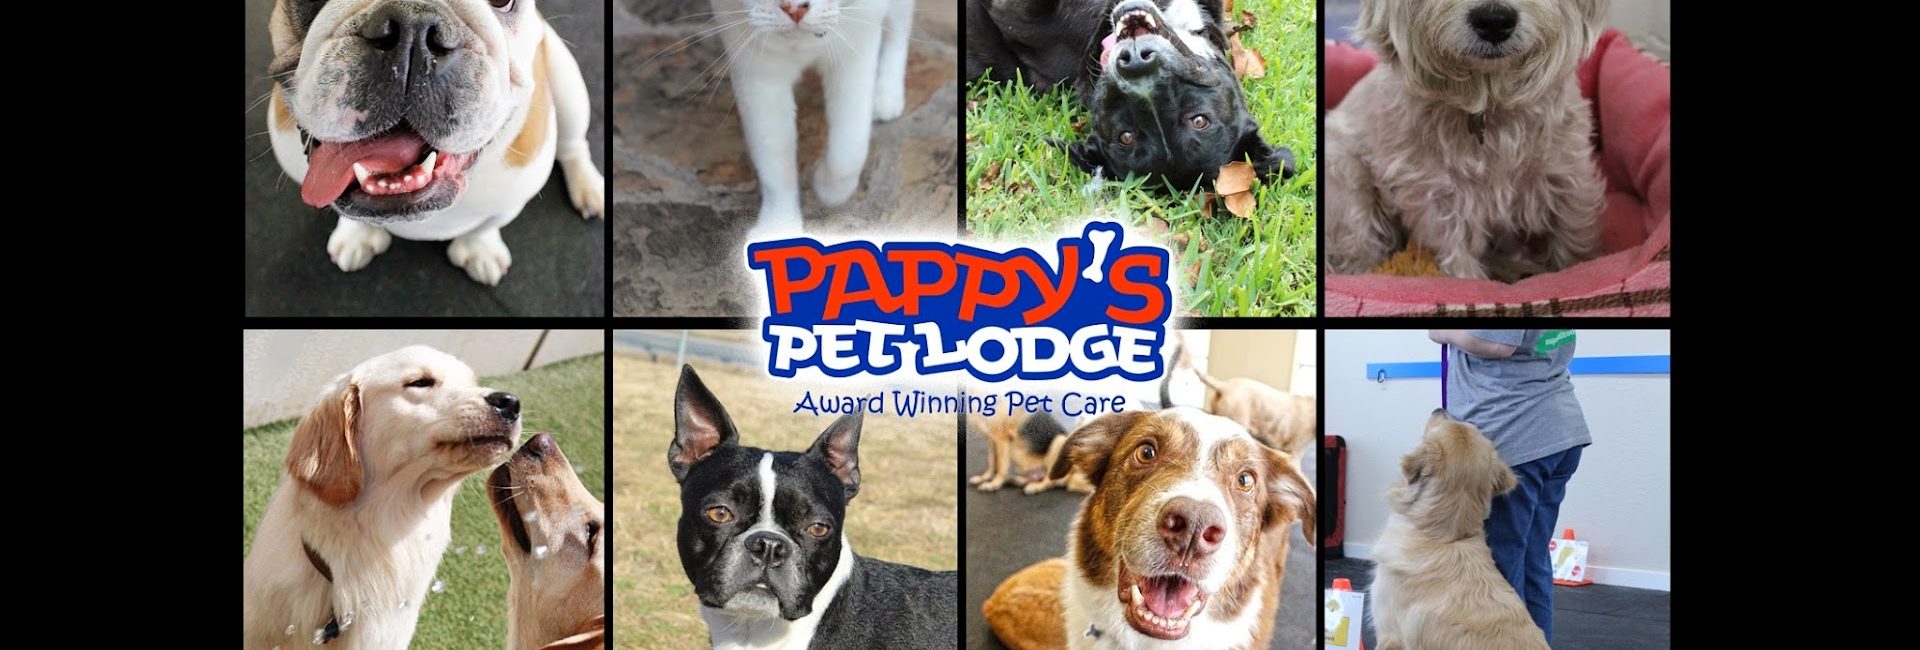 Pappy’s Pet Lodge – N. Plano 6